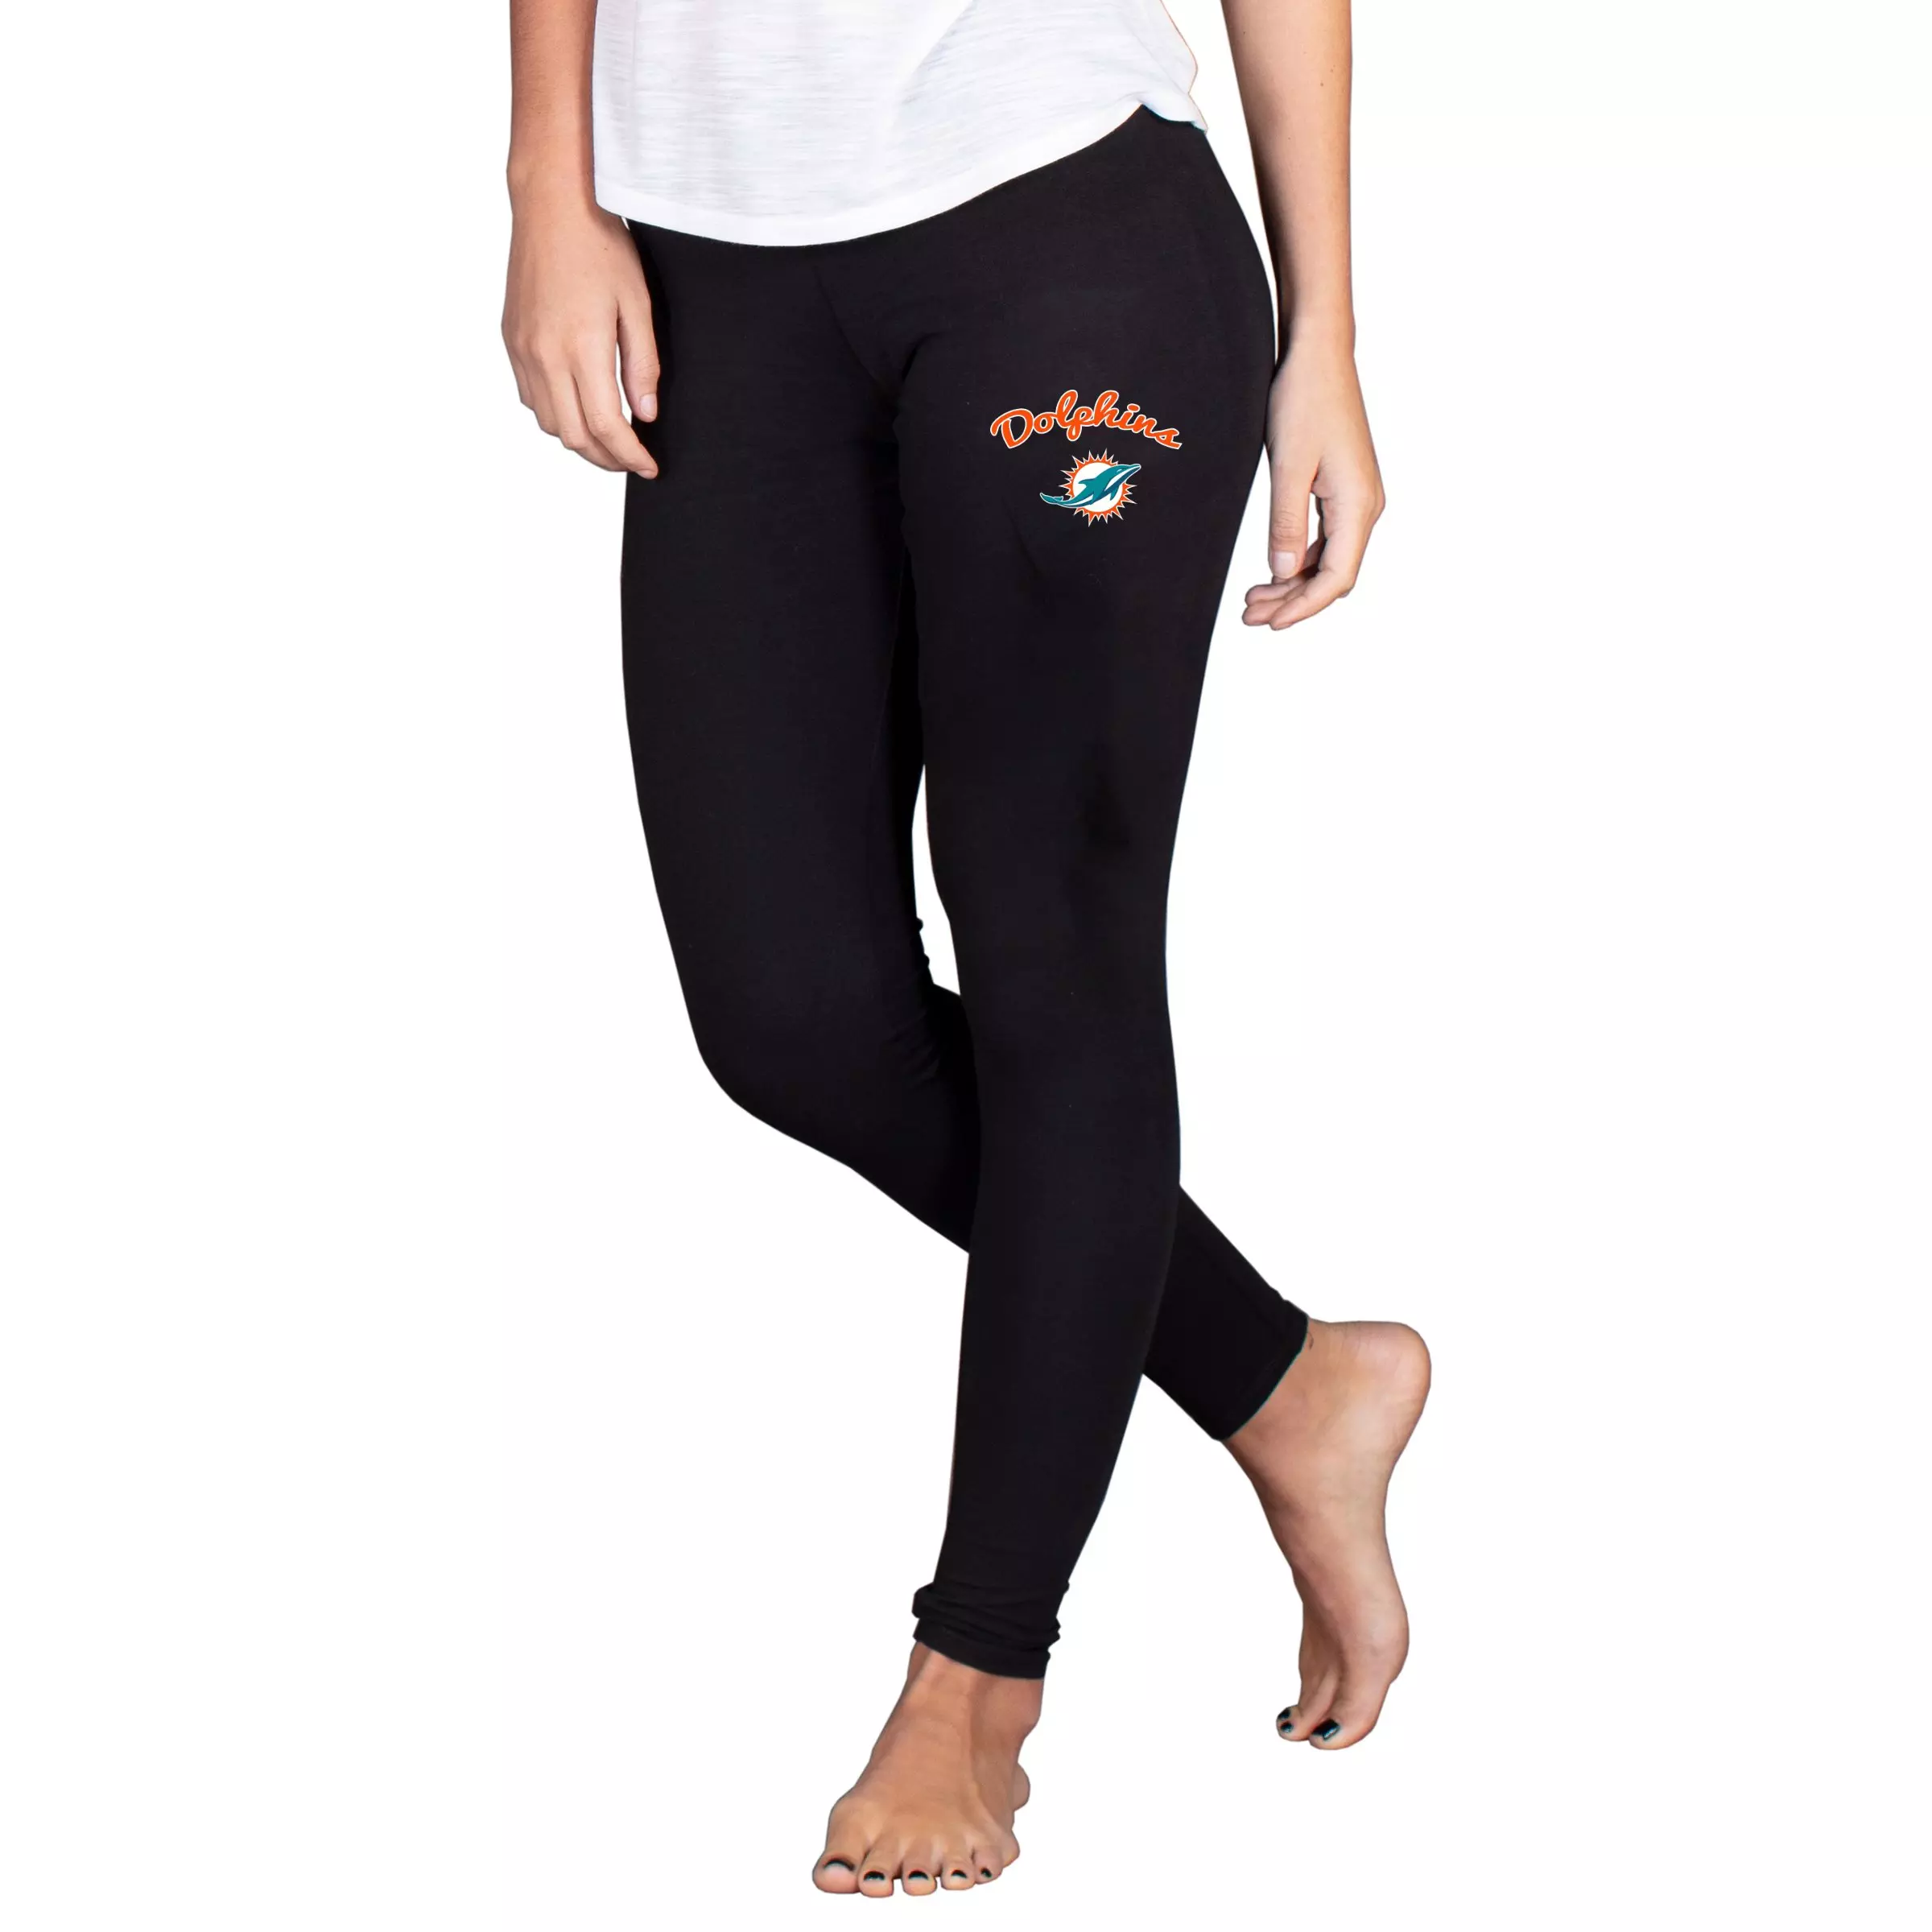 College Concepts Women's Miami Dolphins Fraction Slounge Legging